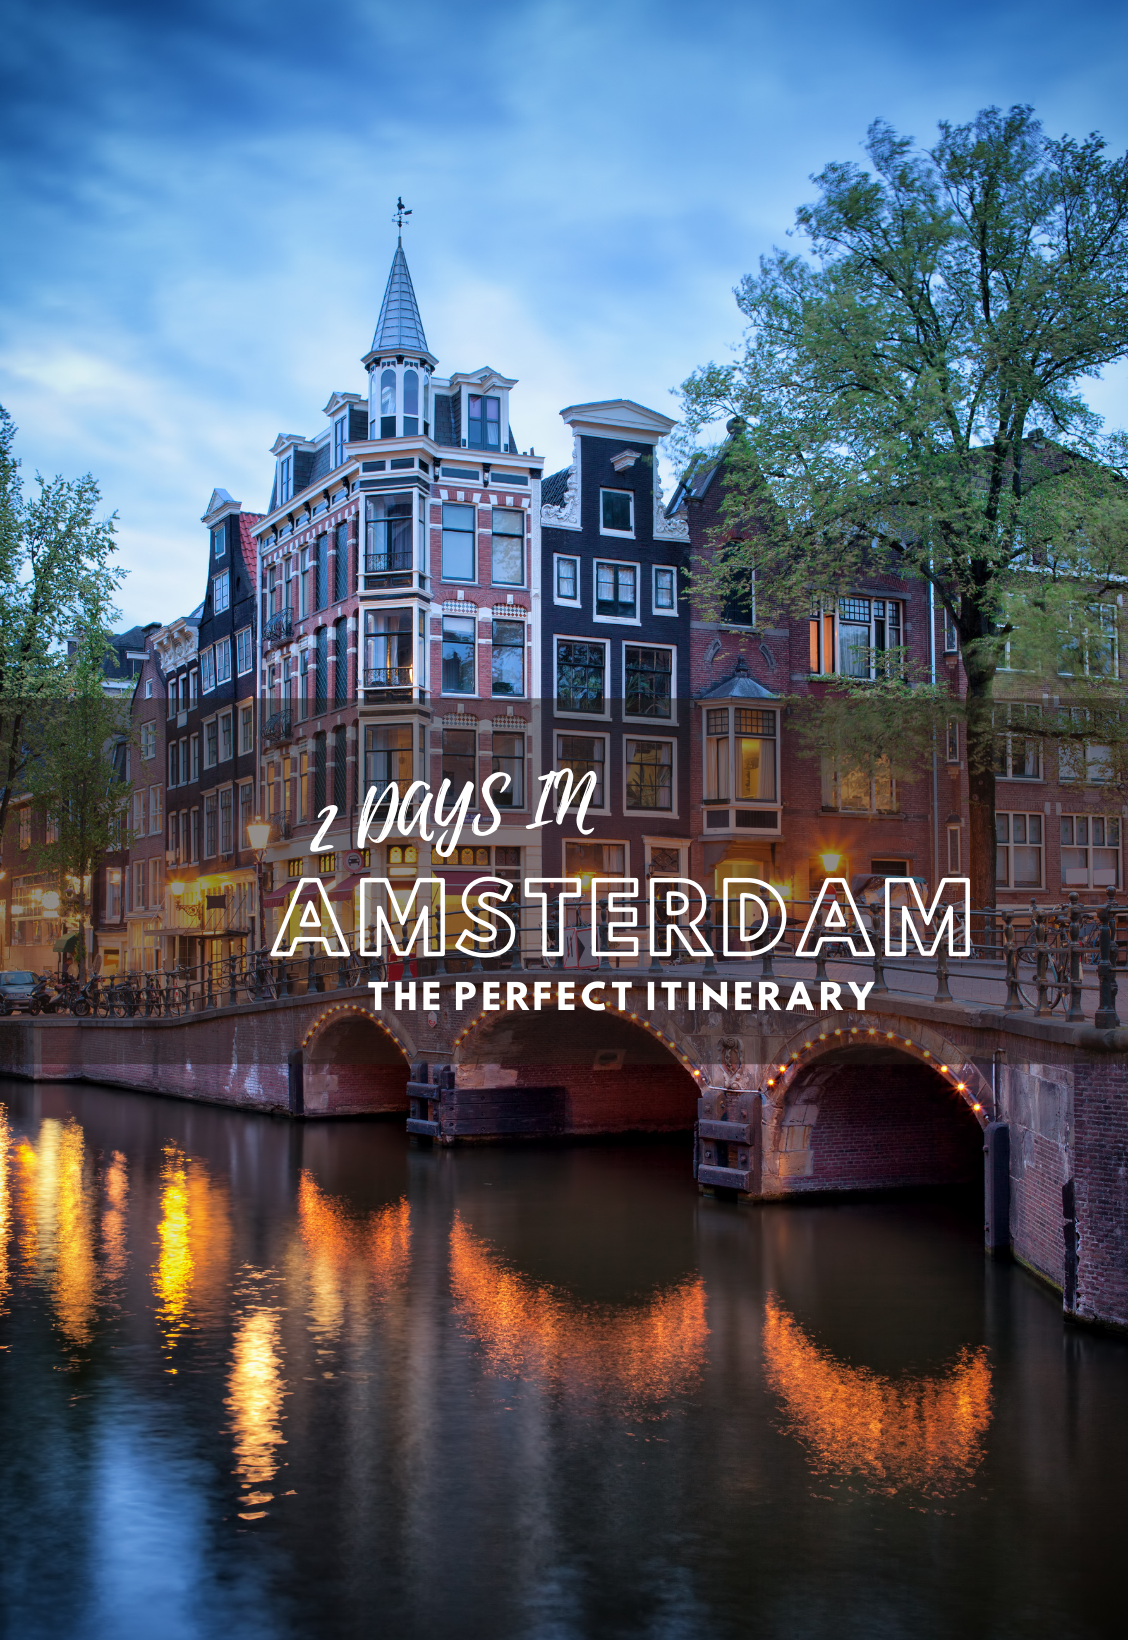 2 DAYS IN AMSTERDAM: THE PERFECT ITINERARY